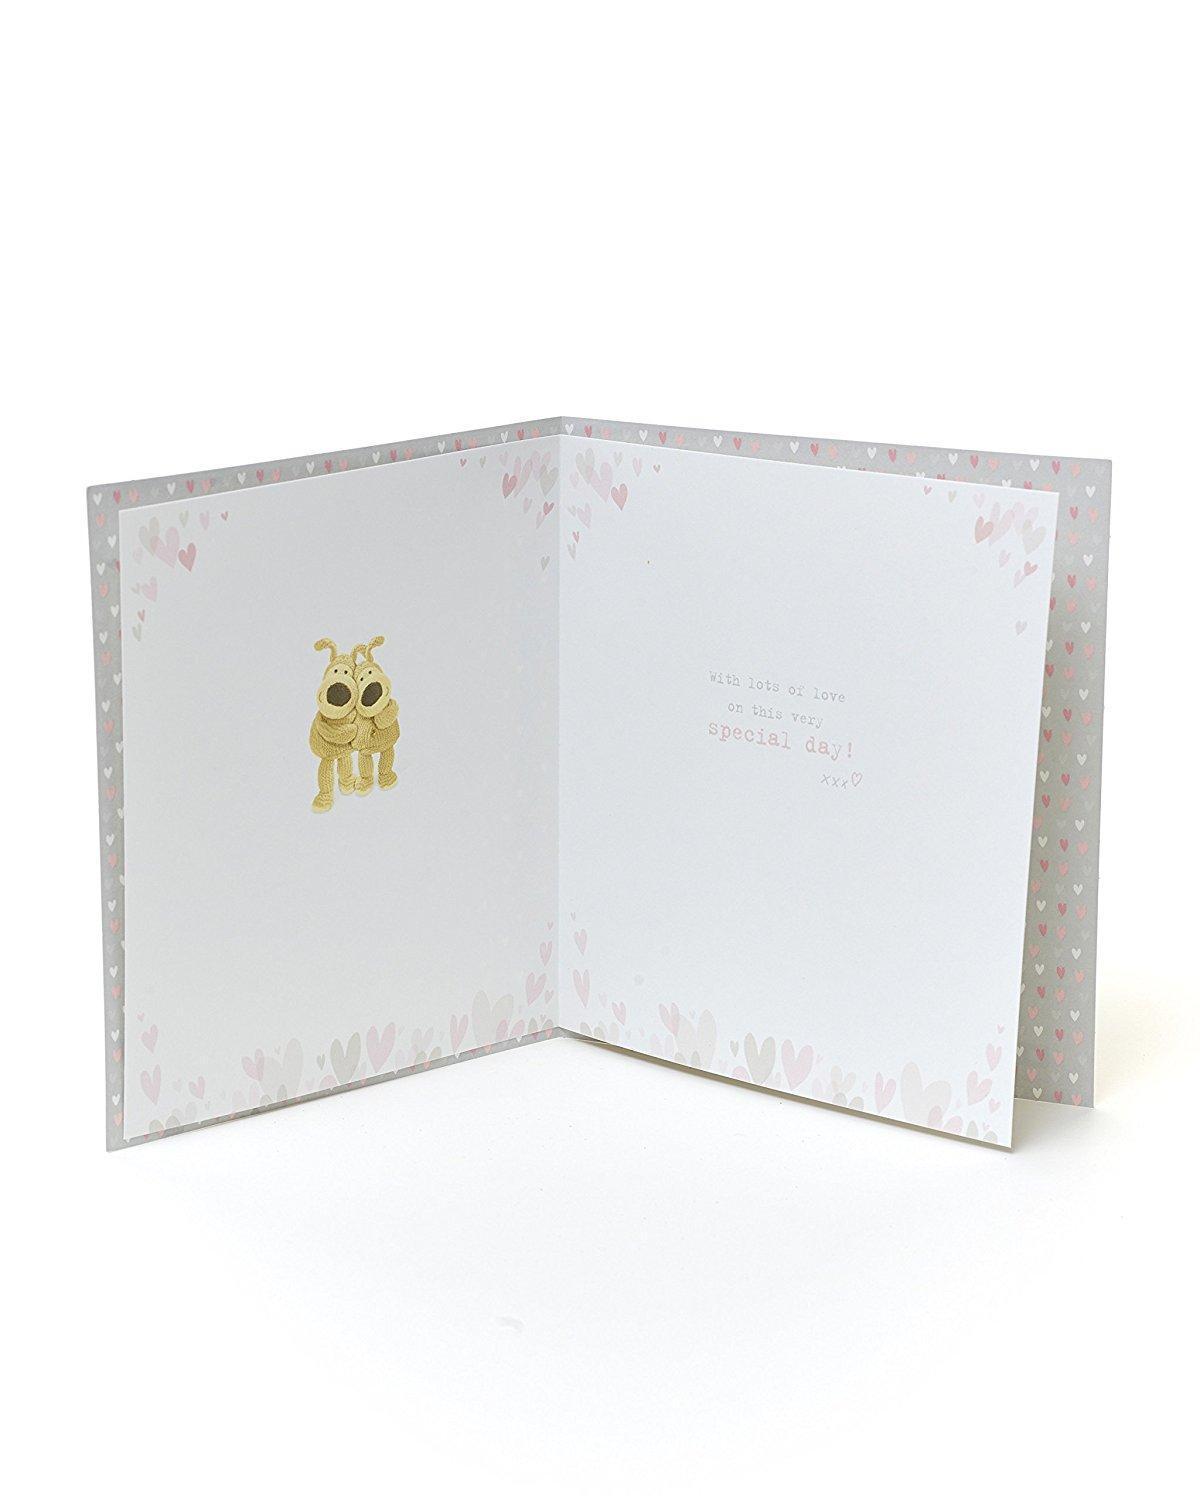 Both of You Celebrate Happy Anniversary Adorable Boofle Greetings Card 